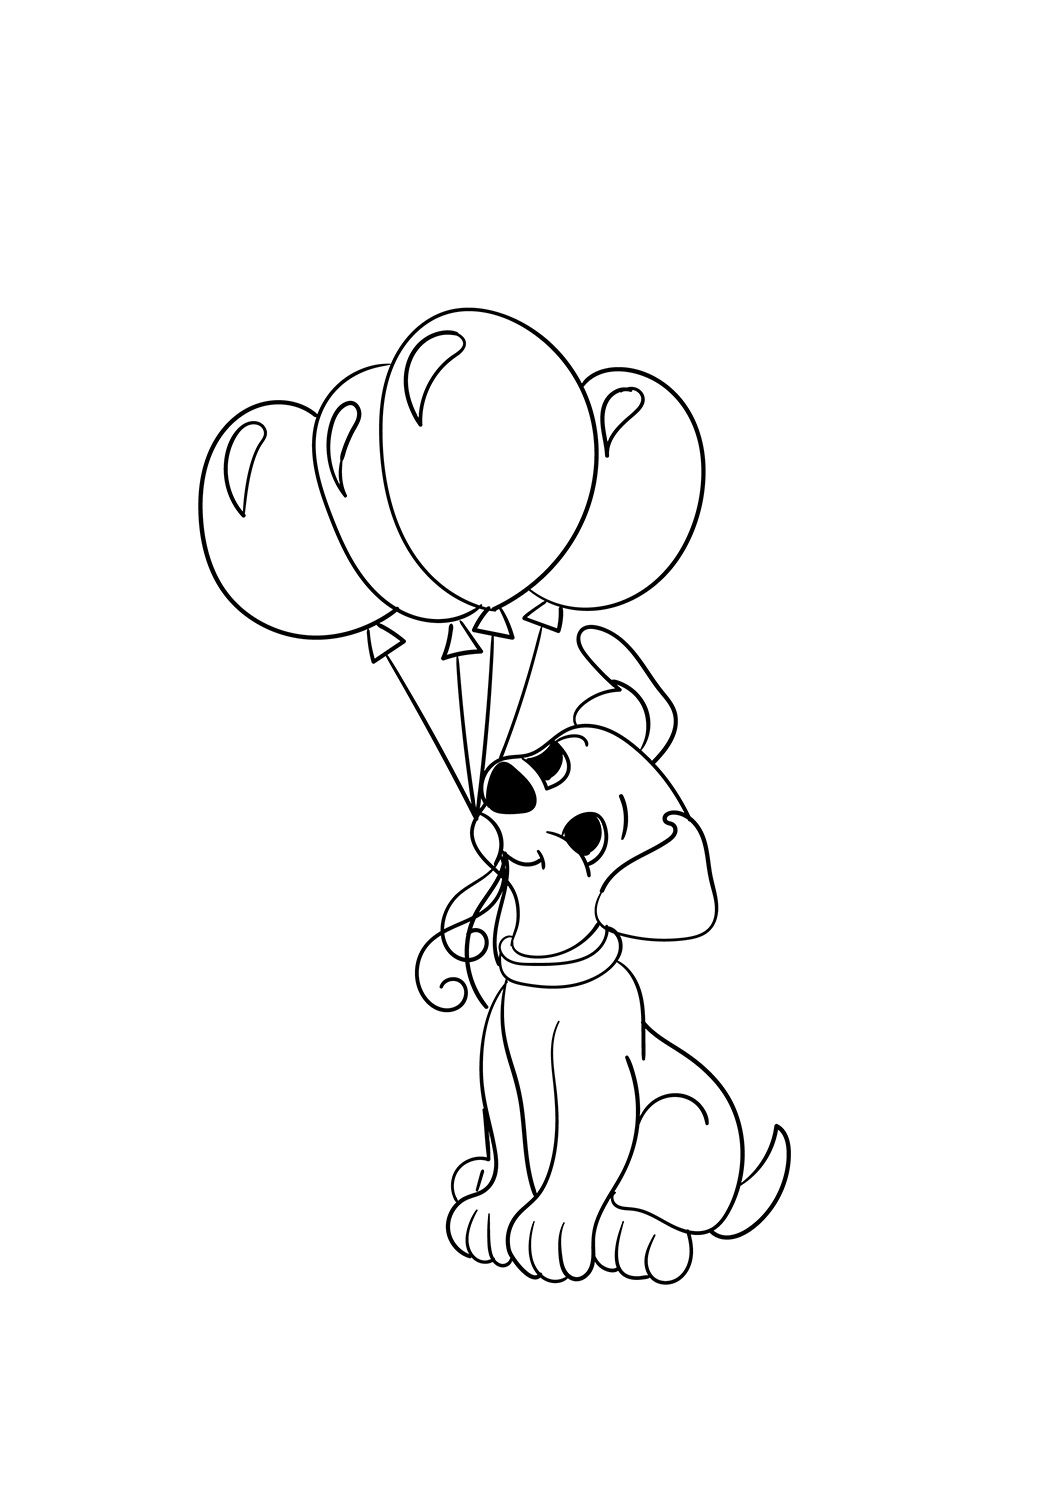 Puppy With Balloons Coloring Page - Free Printable ...